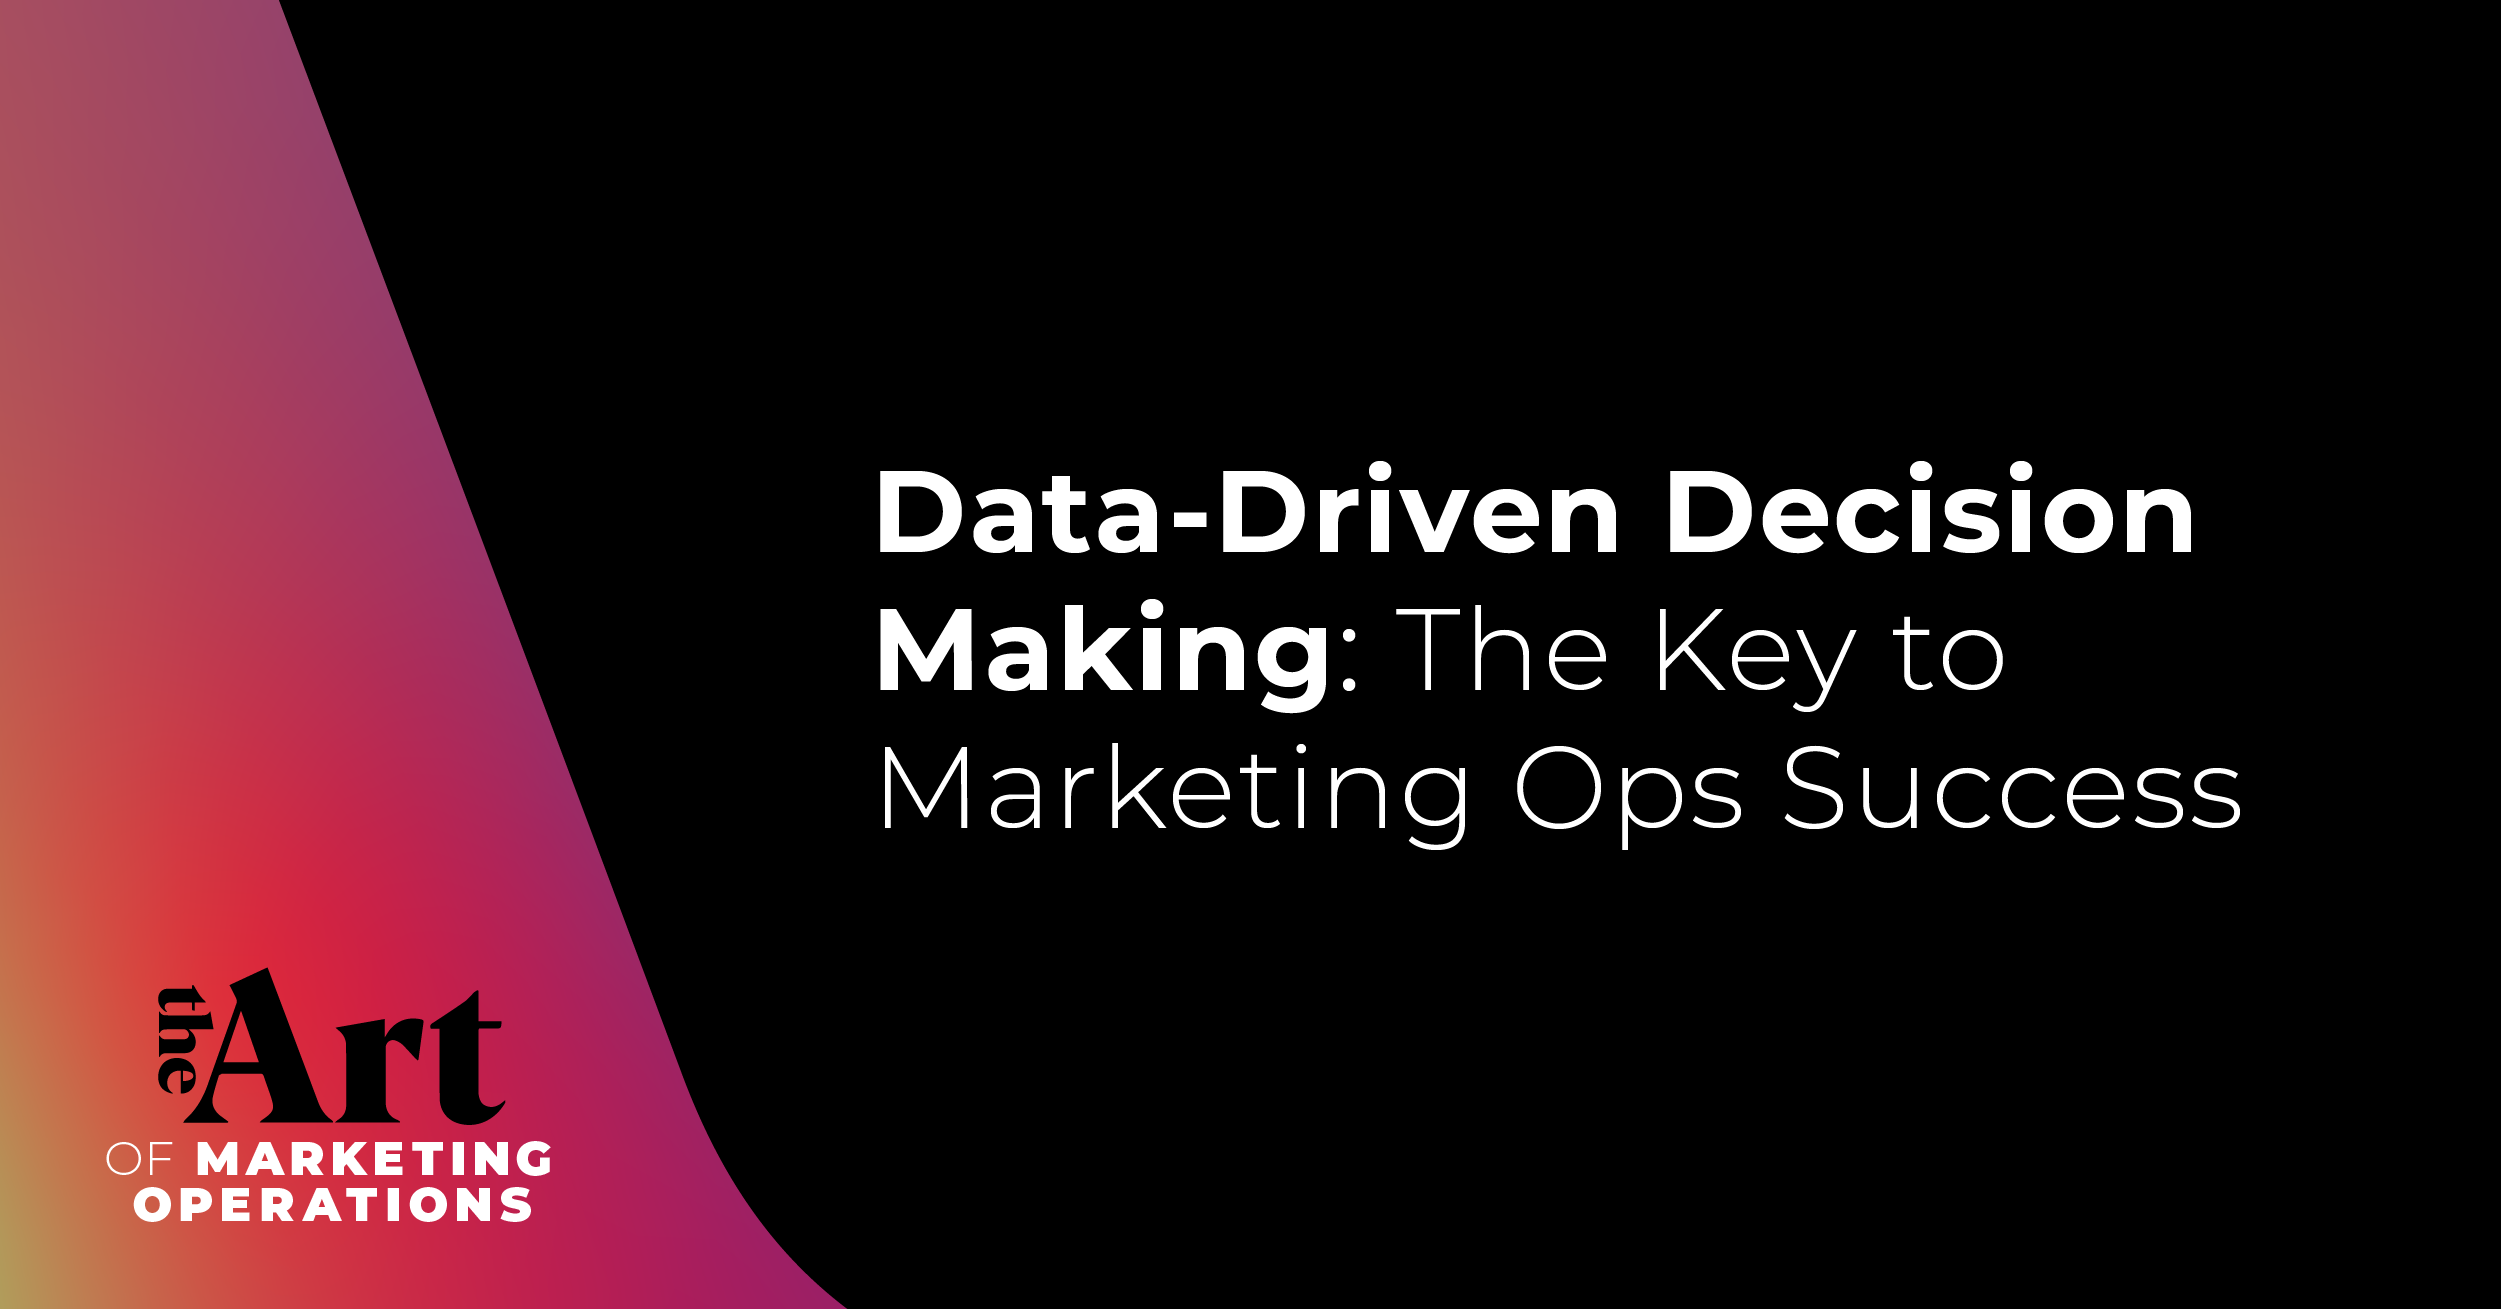 Featured image for article: Ep: 43 - Data- Driven Decision Making: The Key to Marketing Ops Success